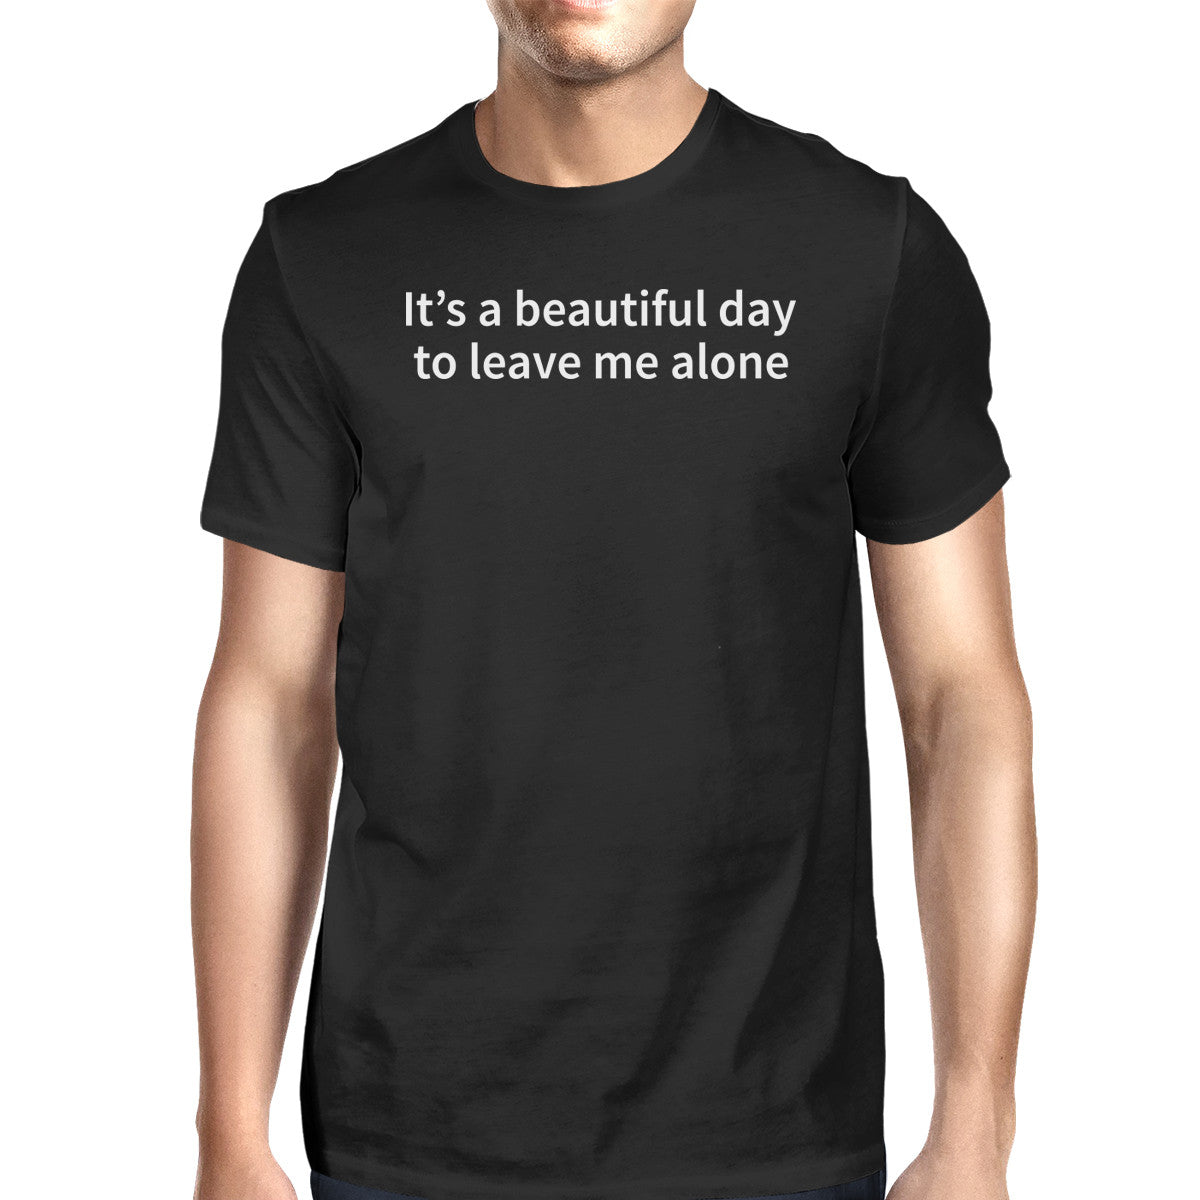 Its Better Day To Leave Me Alone Men's T-shirt Short Sleeve 